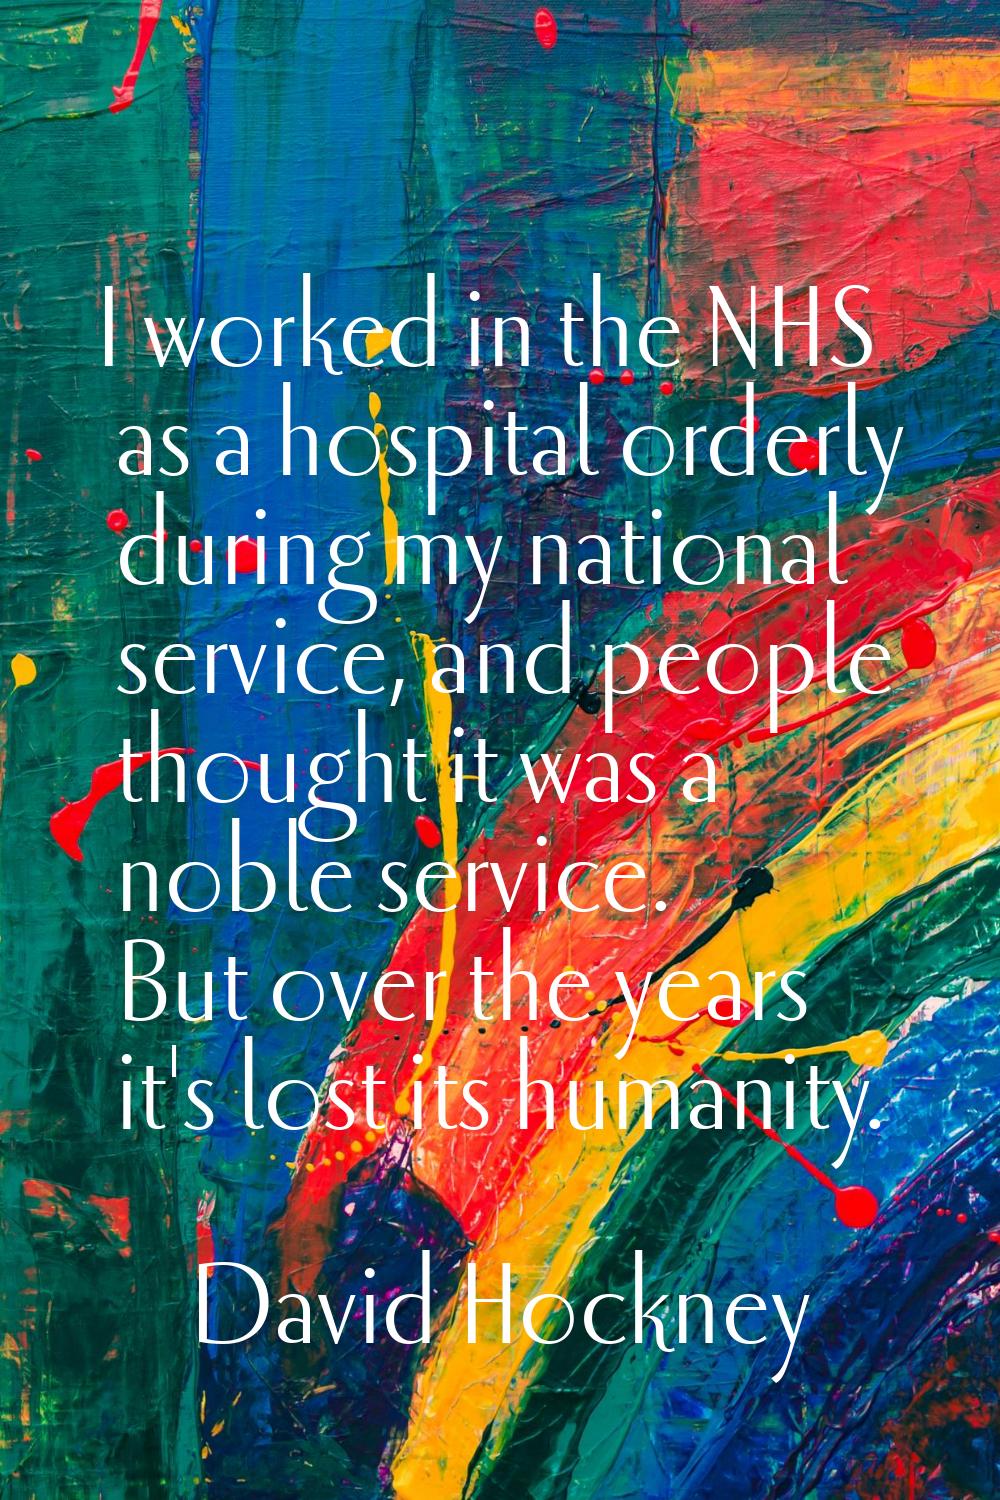 I worked in the NHS as a hospital orderly during my national service, and people thought it was a n